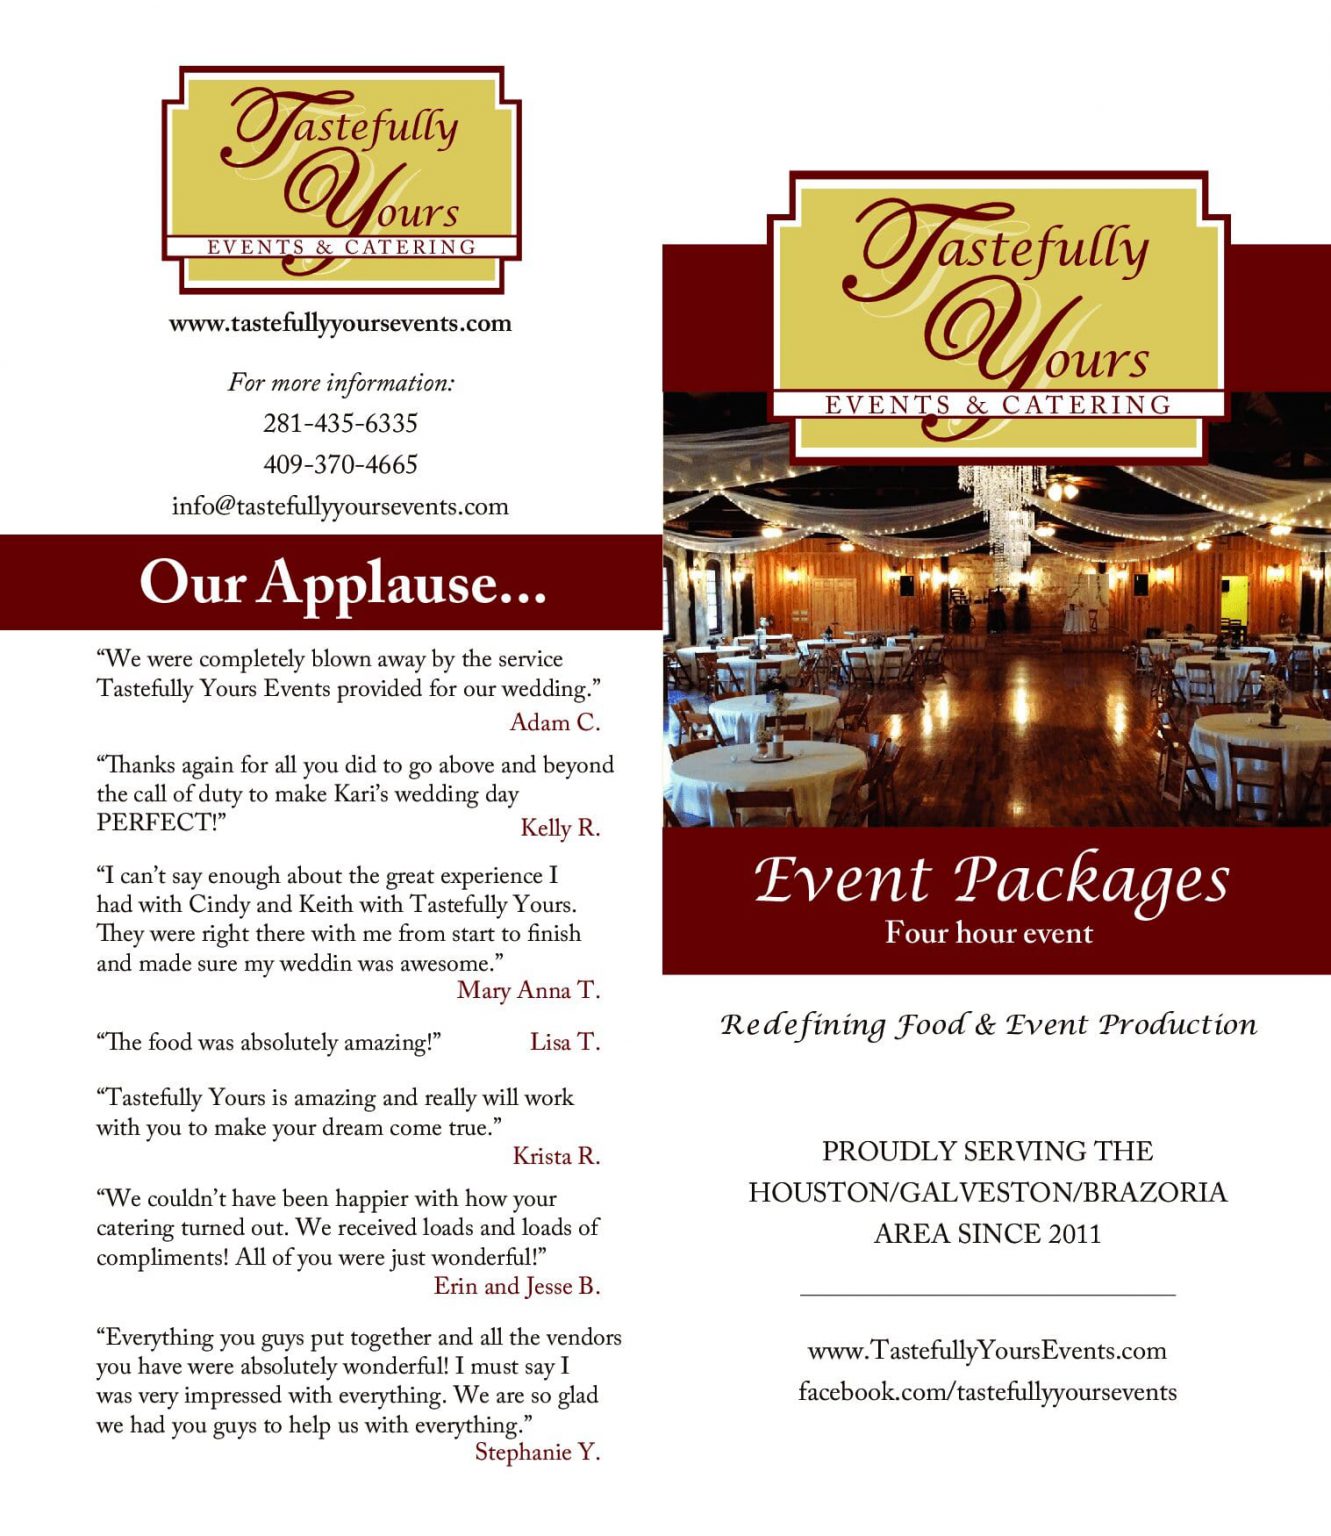 Event Packages Tastefully Yours Events & Catering